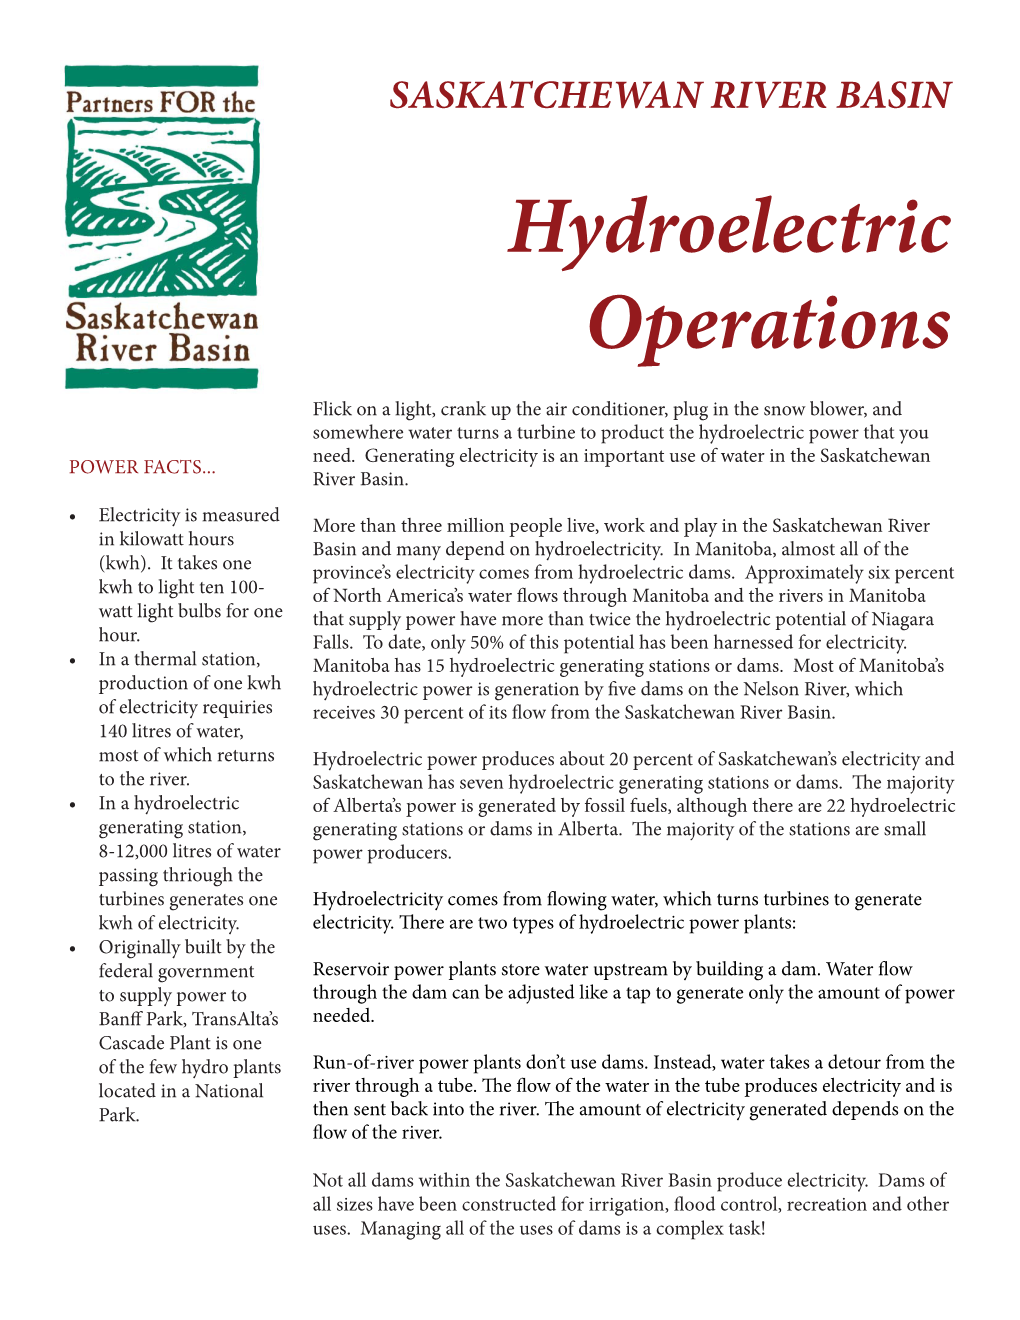 Hydroelectric Operations